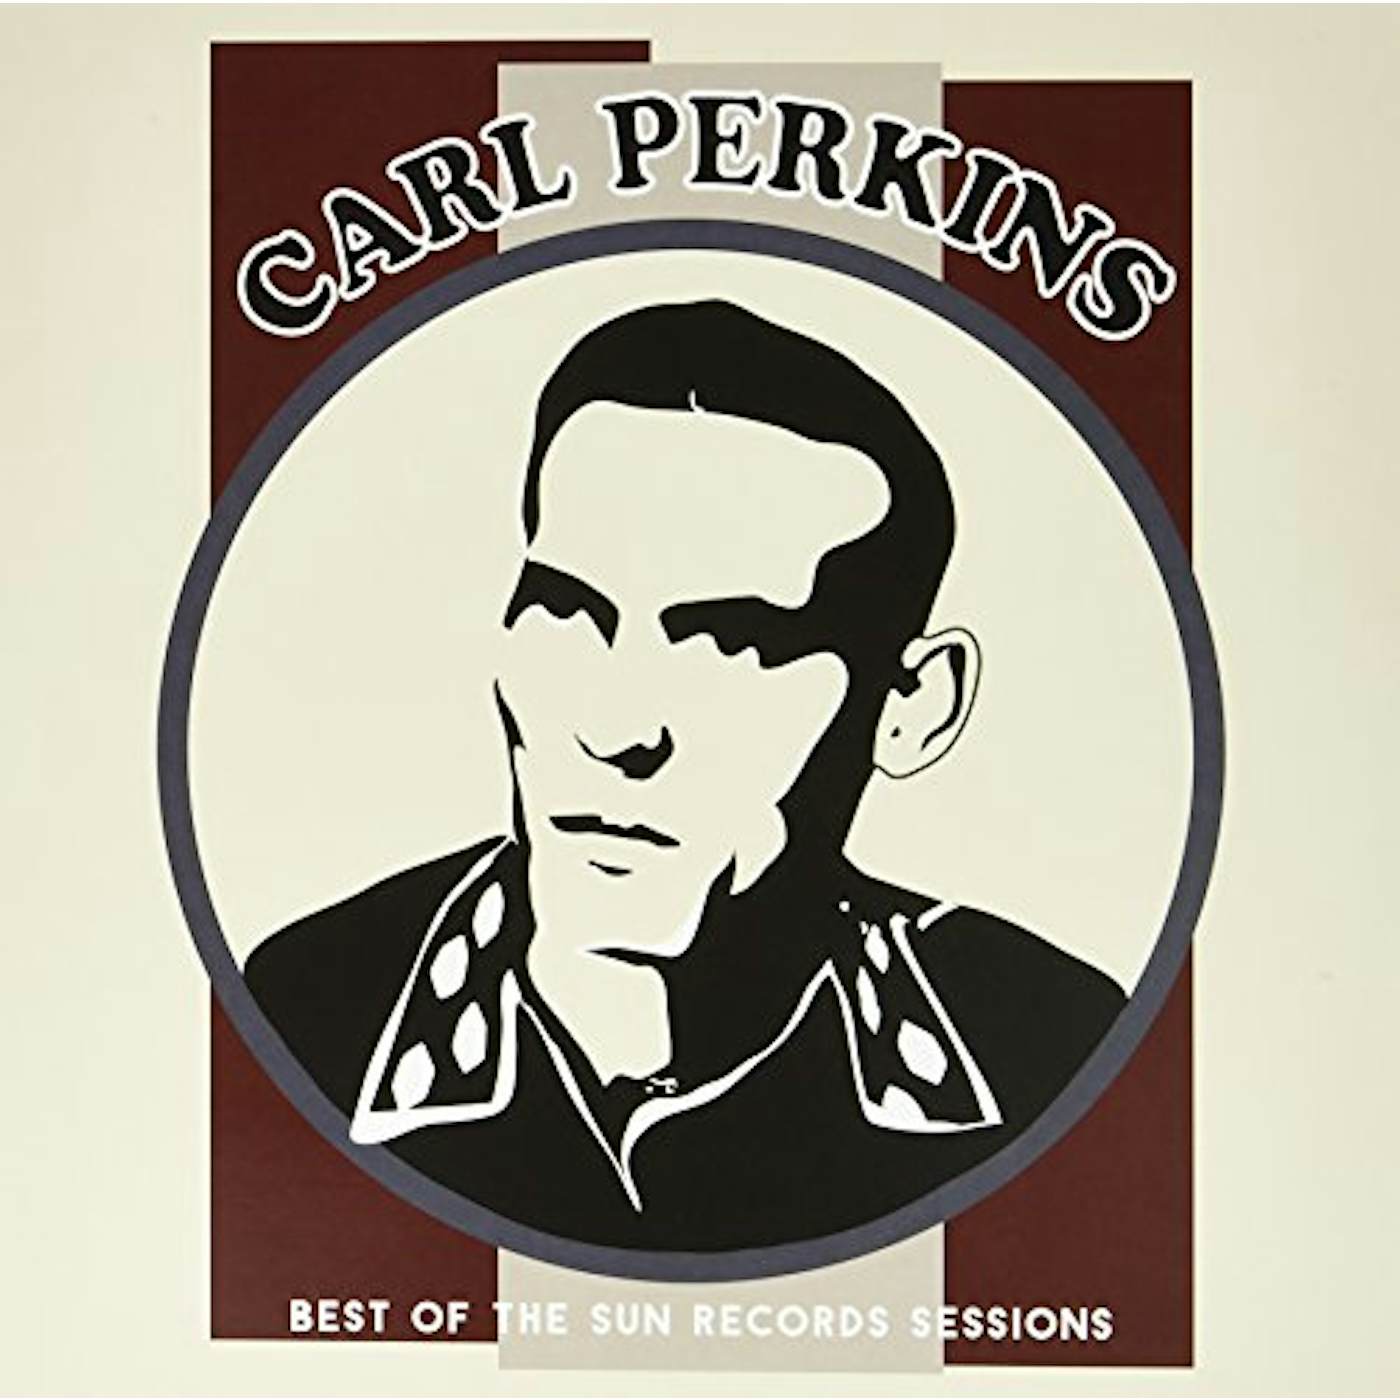 Carl Perkins Best Of The Sun Records Sessions Vinyl Record